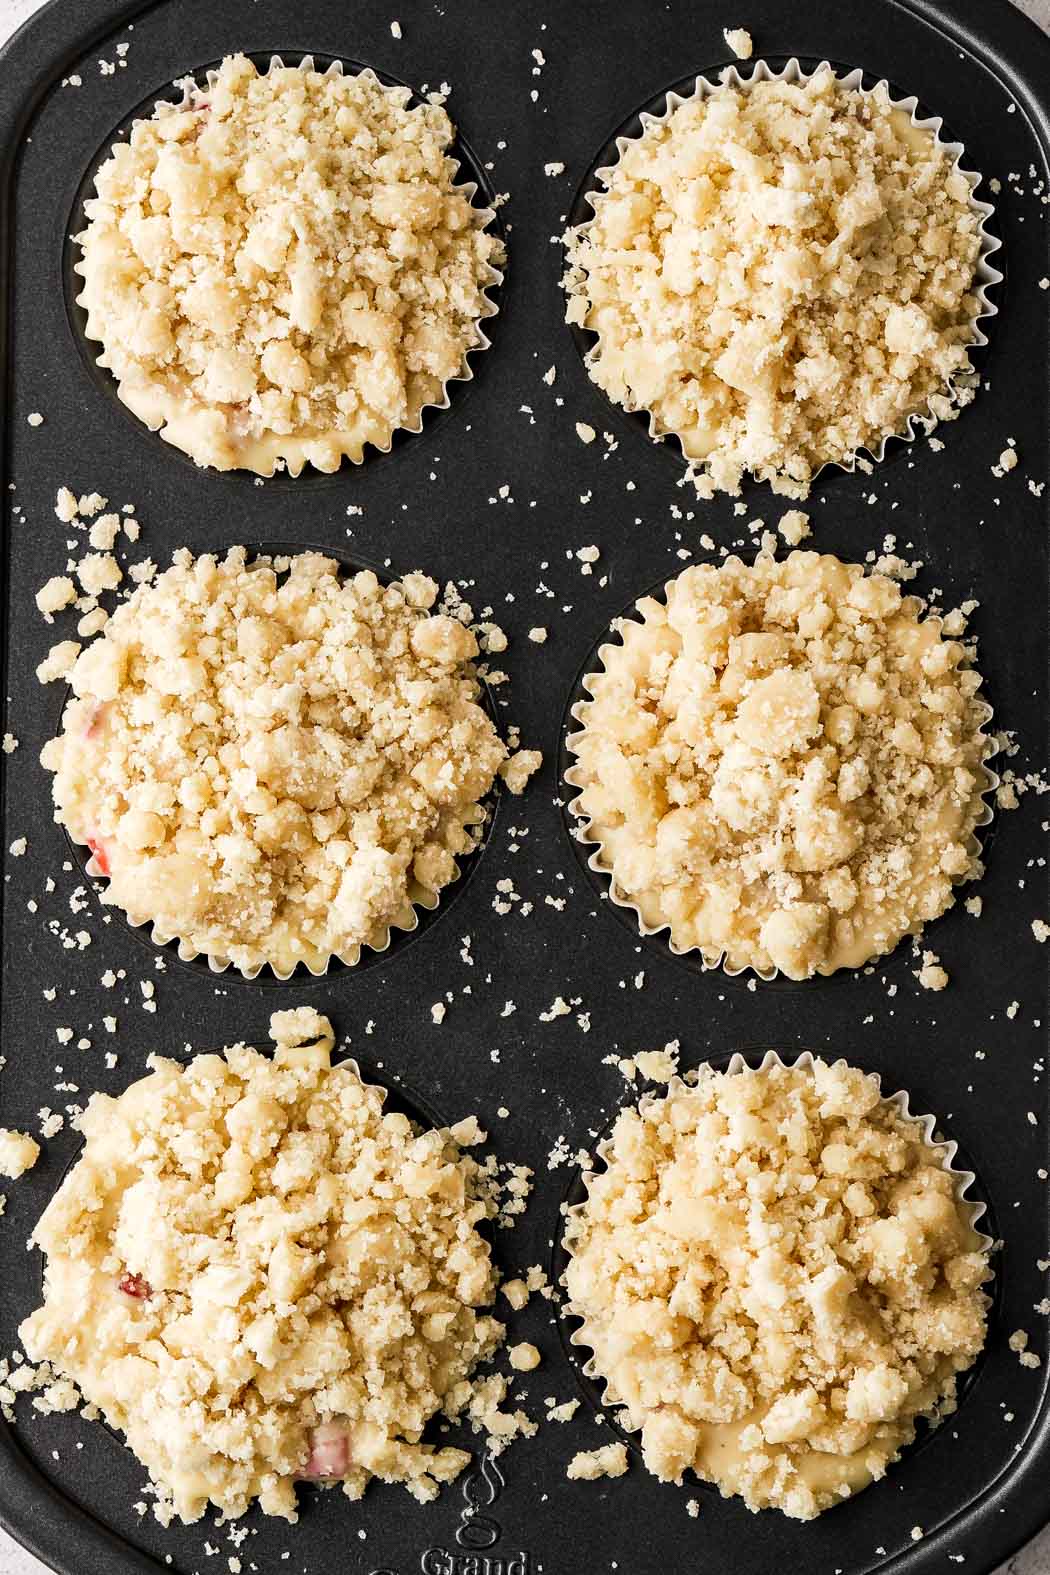 fill muffin tins to the top and top with streusel